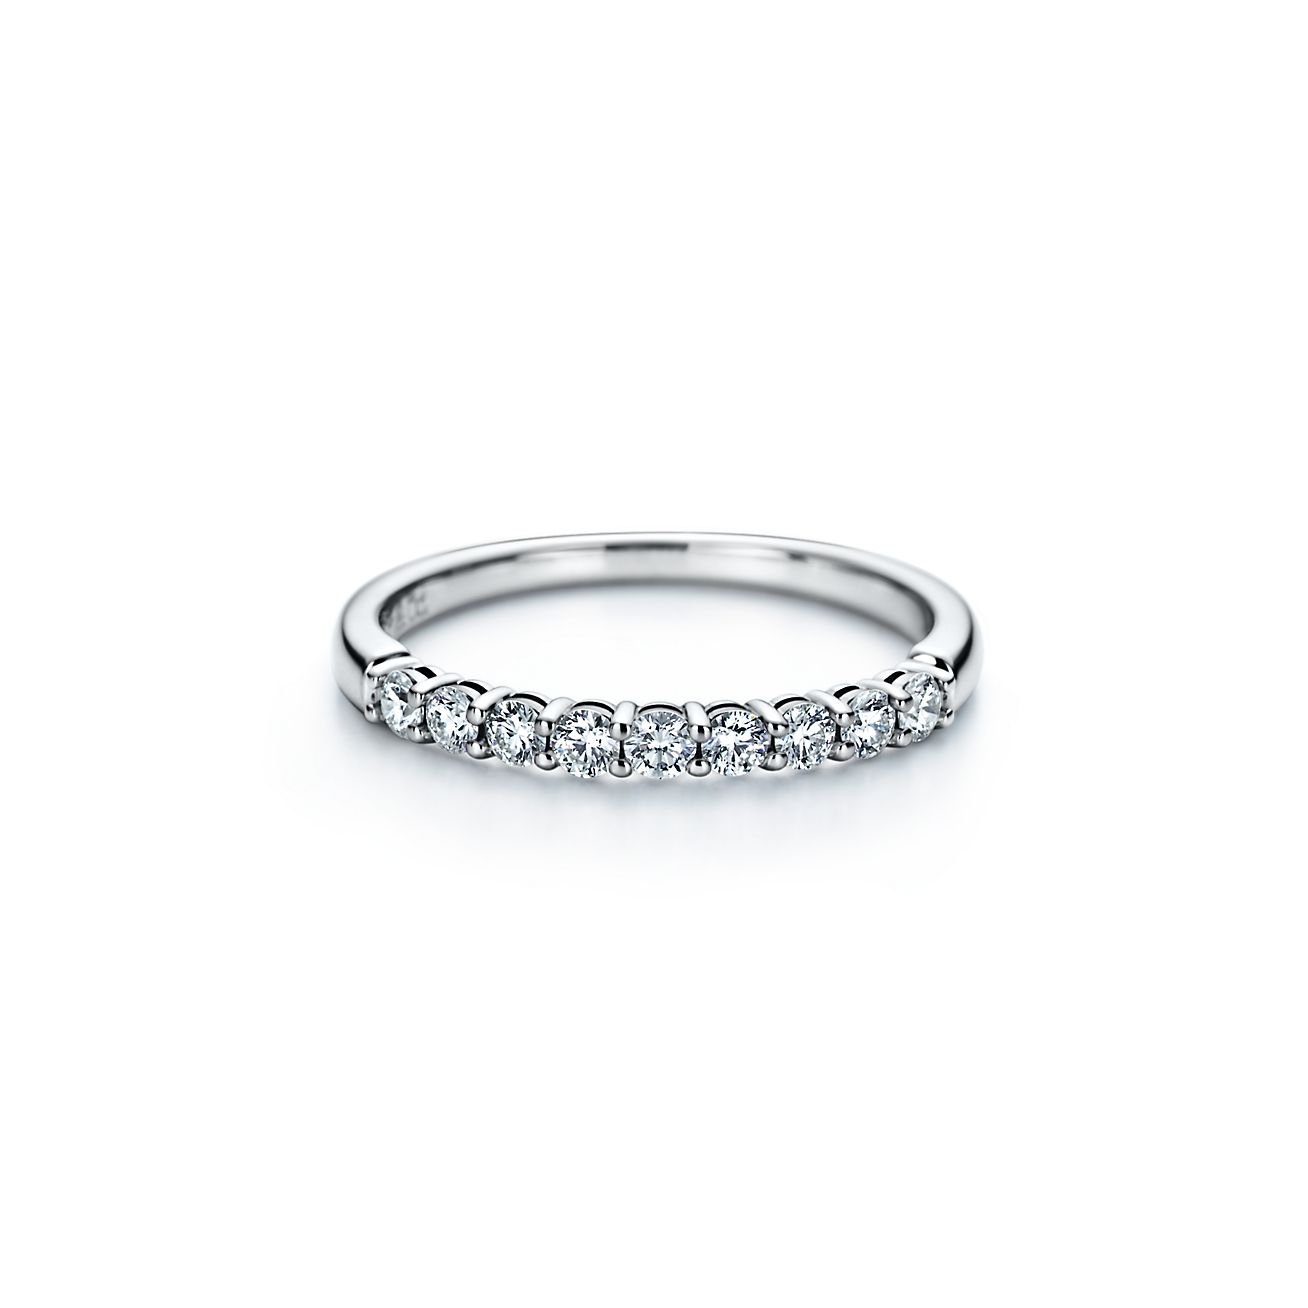 Tiffany Forever Band Ring in Platinum with a Half-circle of